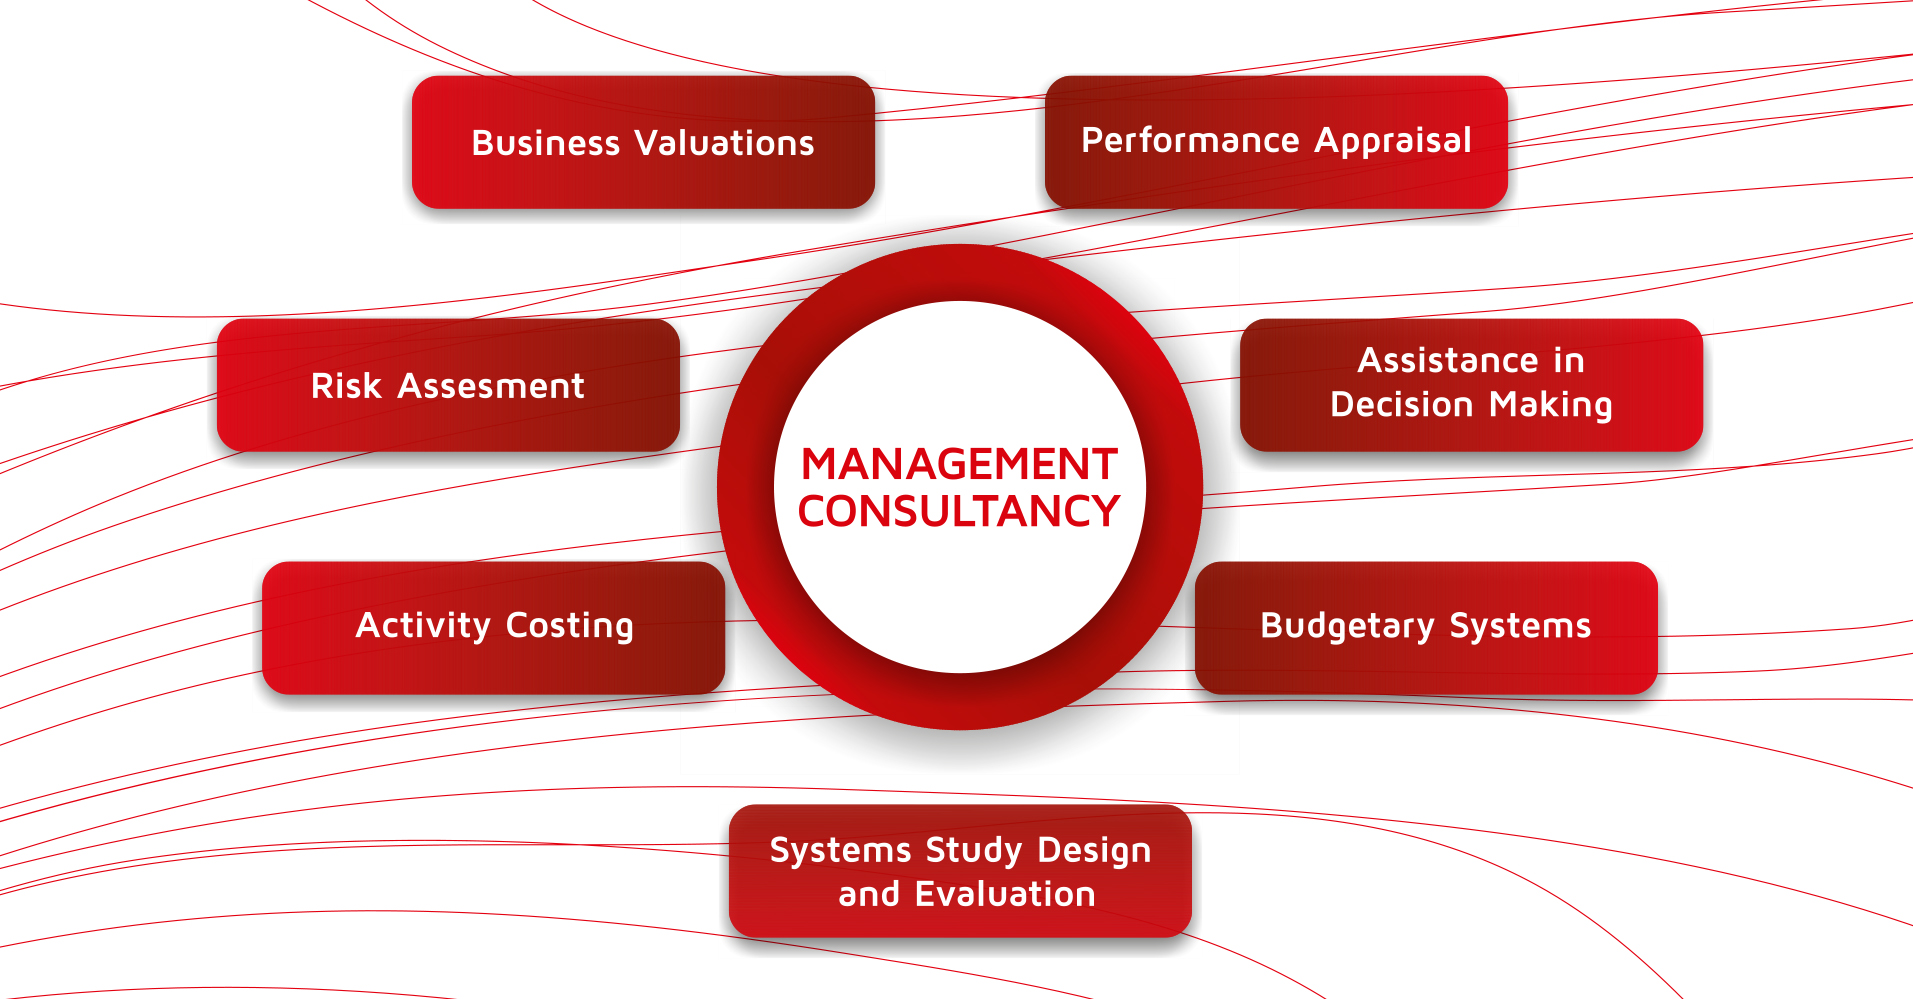 Business Process Improvement, Internal Audit and Information Security